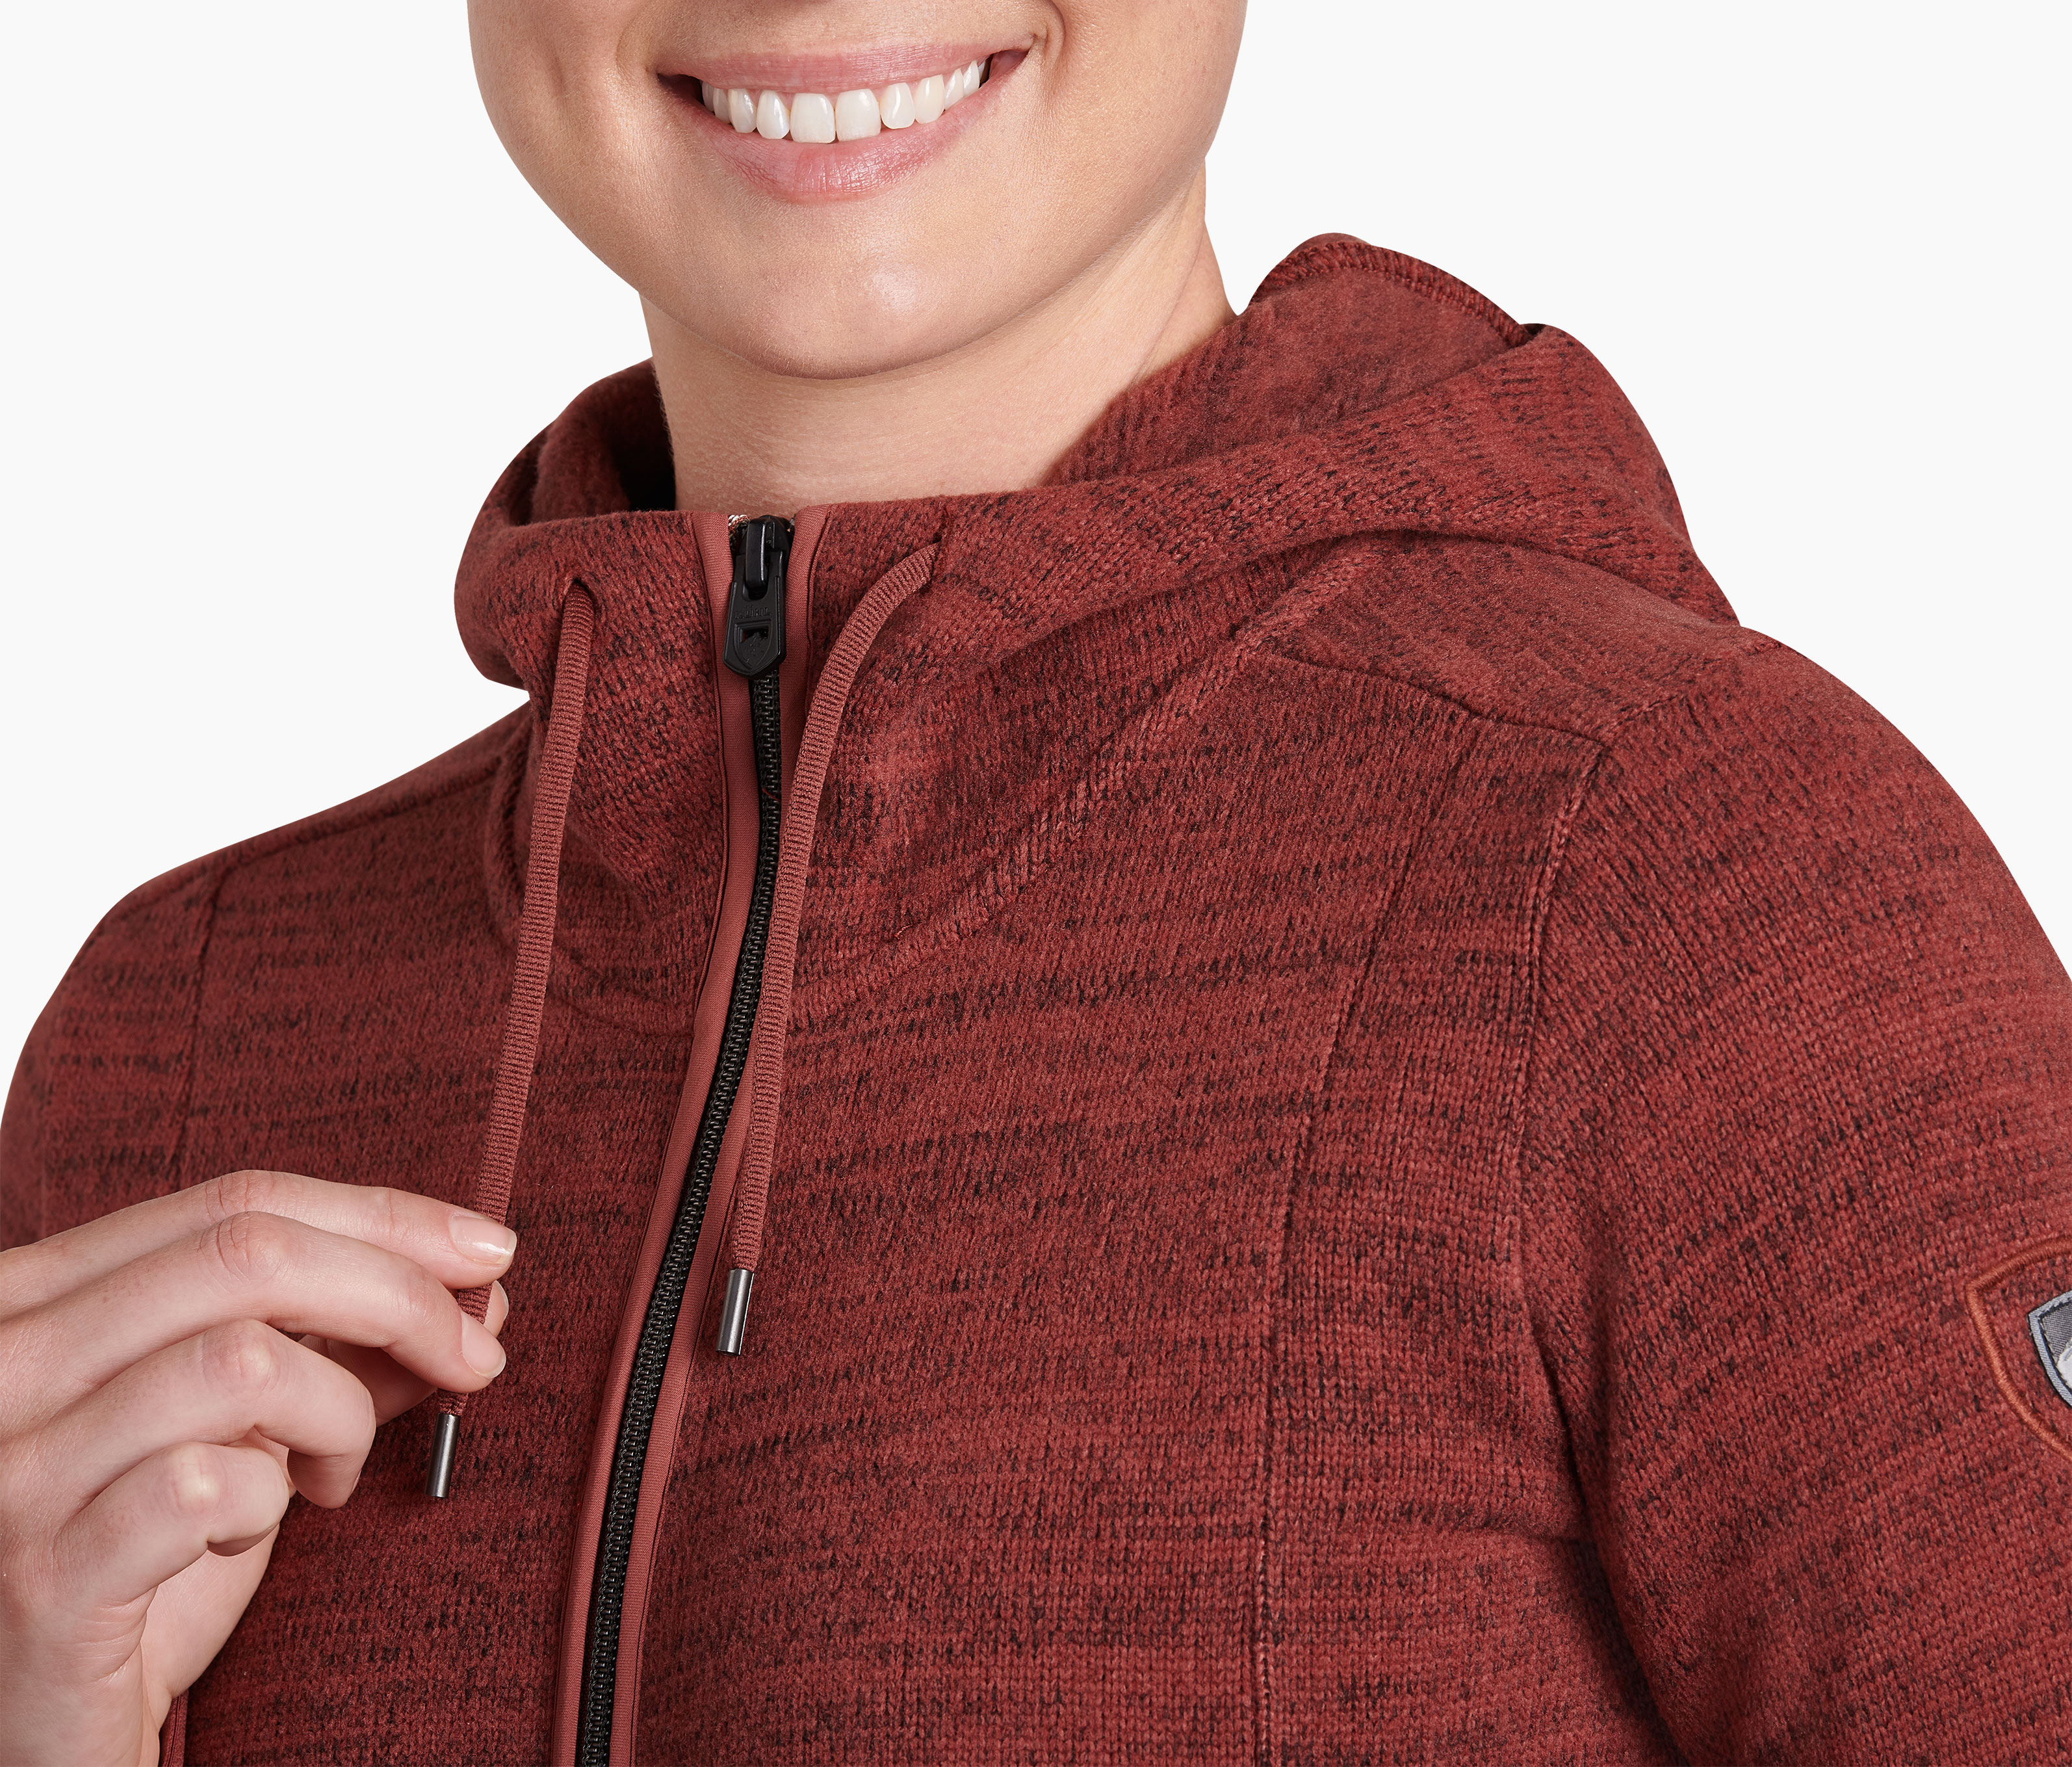 Kuhl Ascendyr 1/4 Zip - Yeager's Sporting Goods